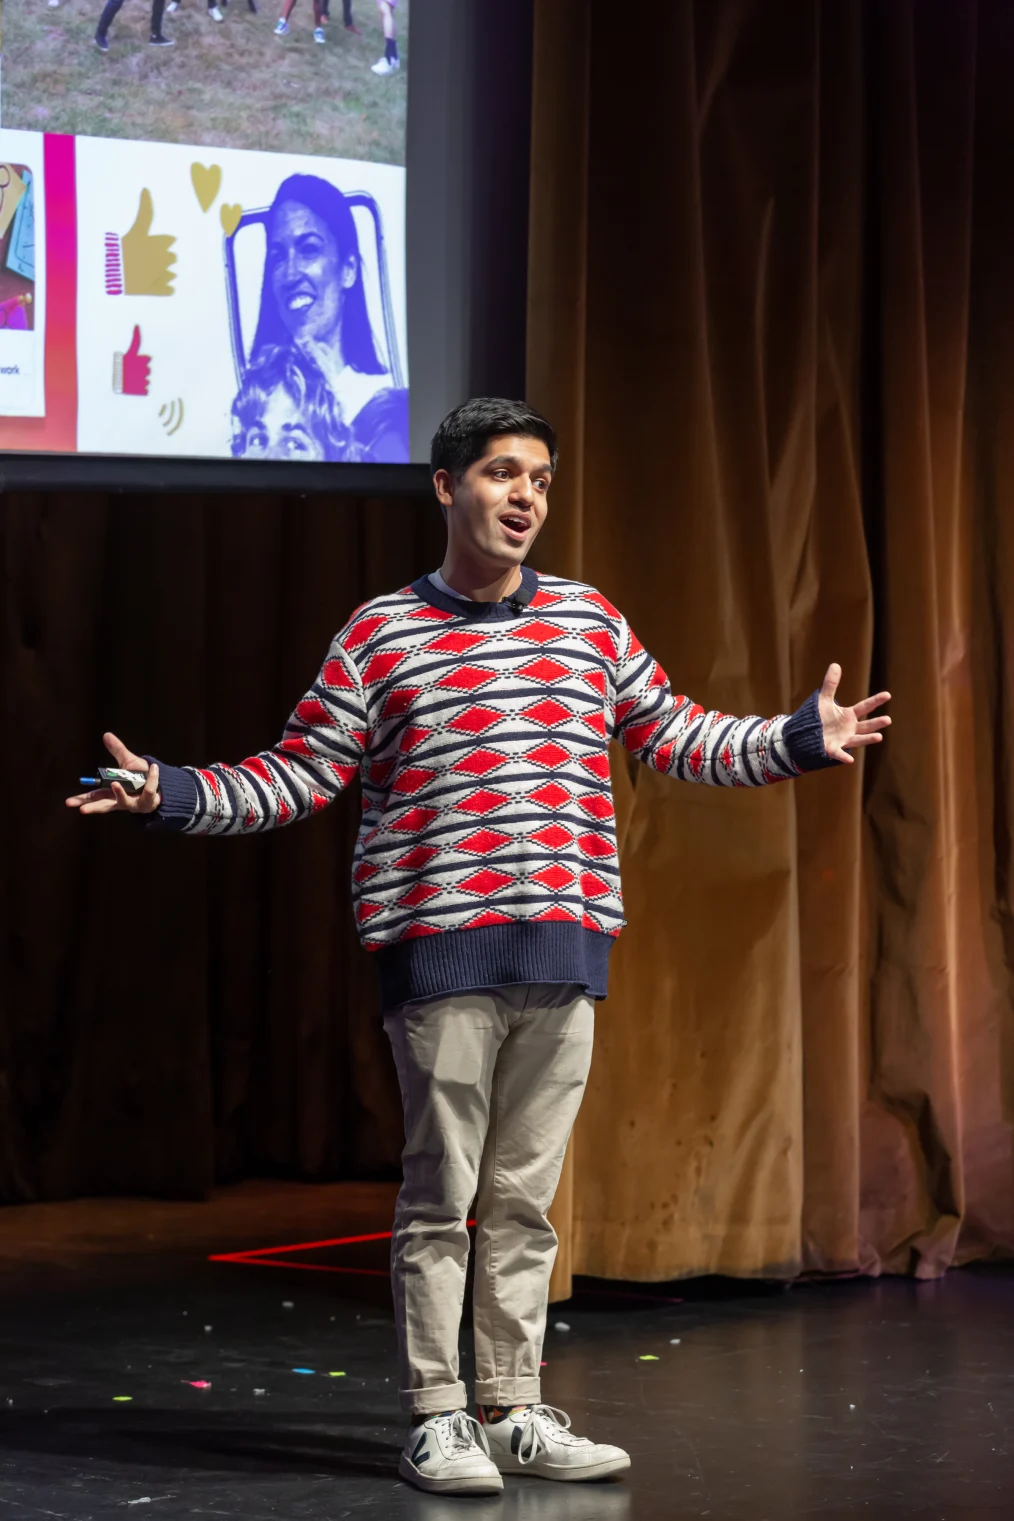 Ziad Ahmed, a man with a medium skin tone, stands on a stage and speaks to an audience. He is wearing a red patterned sweater and his arms are outstretched. A projector screen is behind him. 